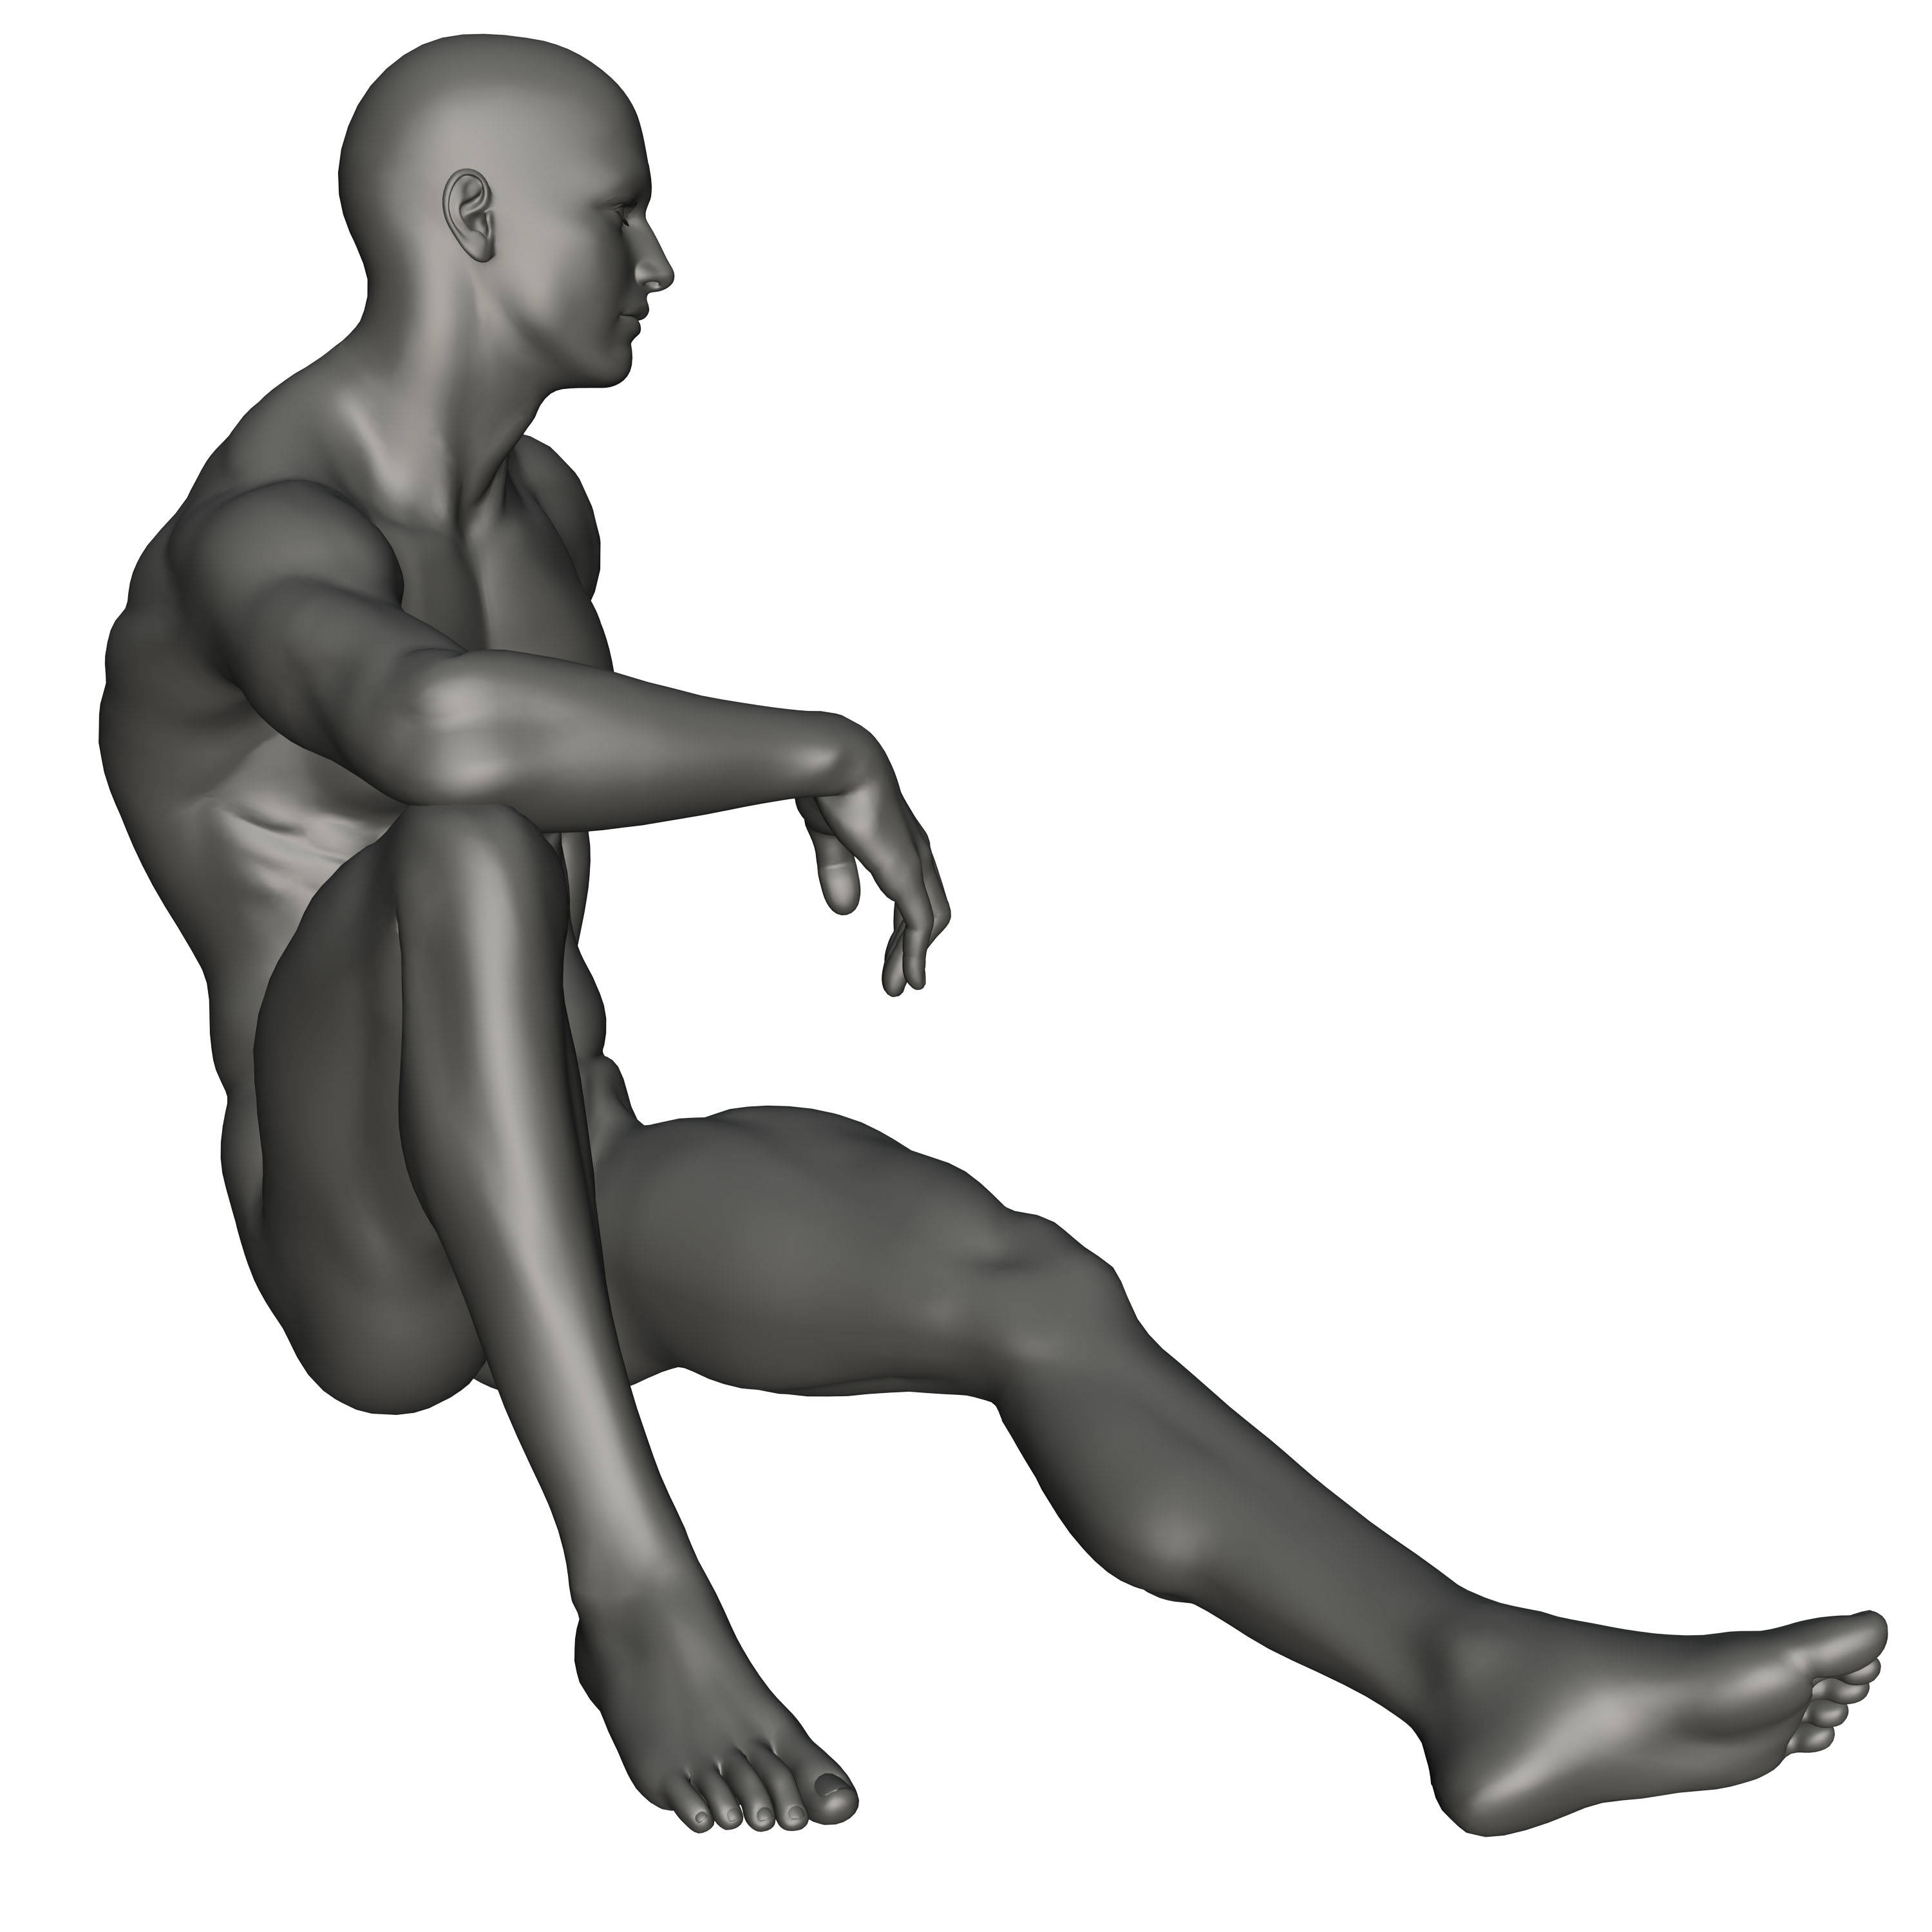 Reference Male Sitting Poses Drawing Male Seated Reference 1 By Posevault.....